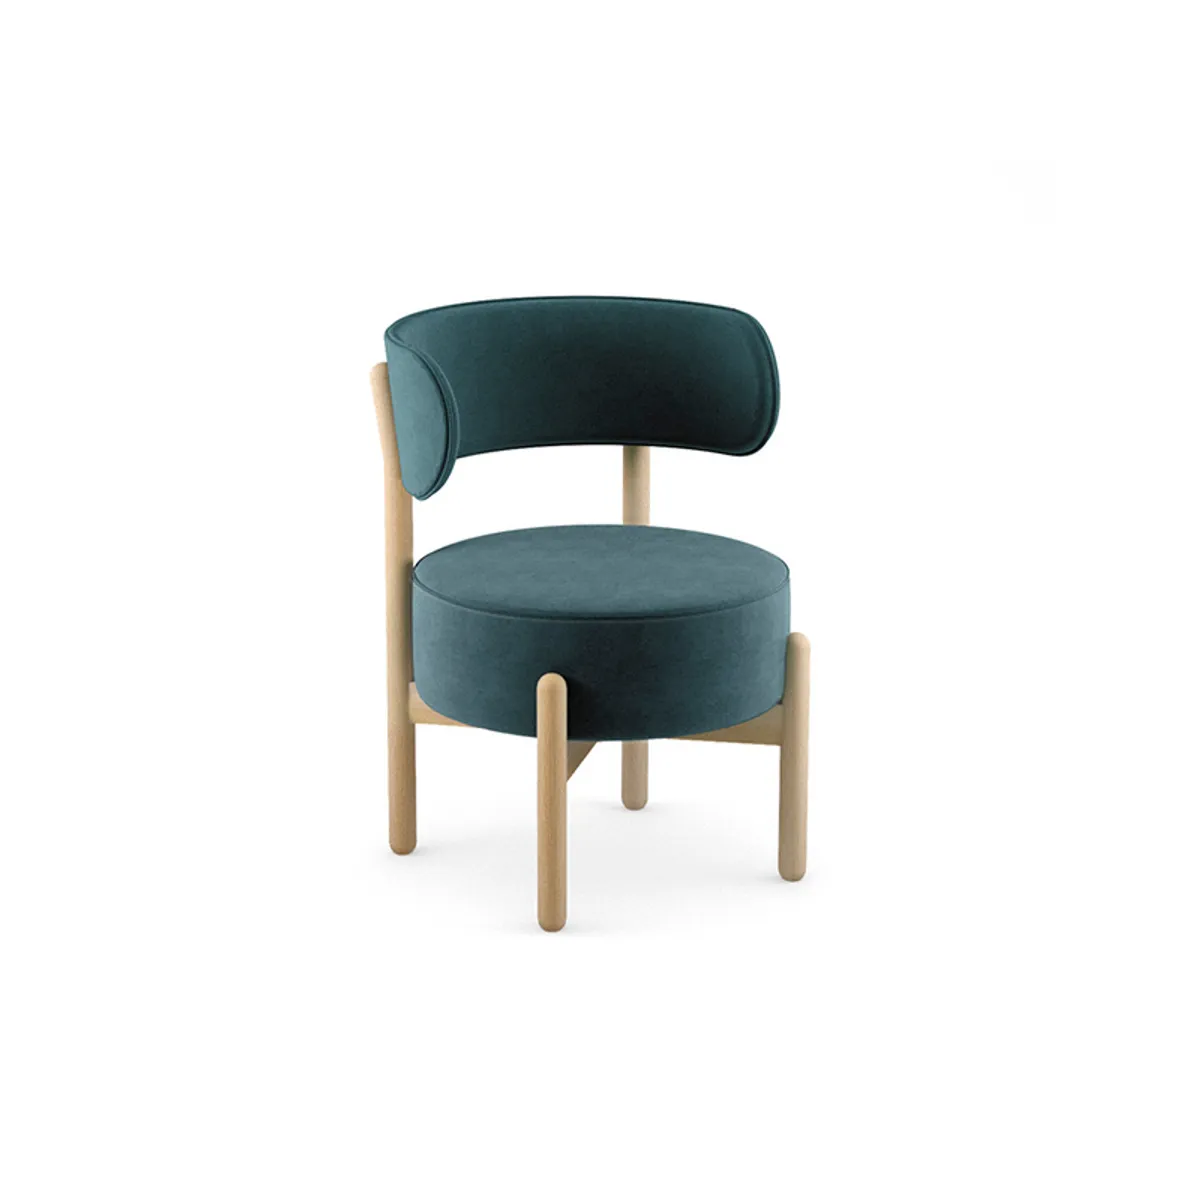 ariel-armchair-wooden-and-upholstered-armchair-with-circular-shape